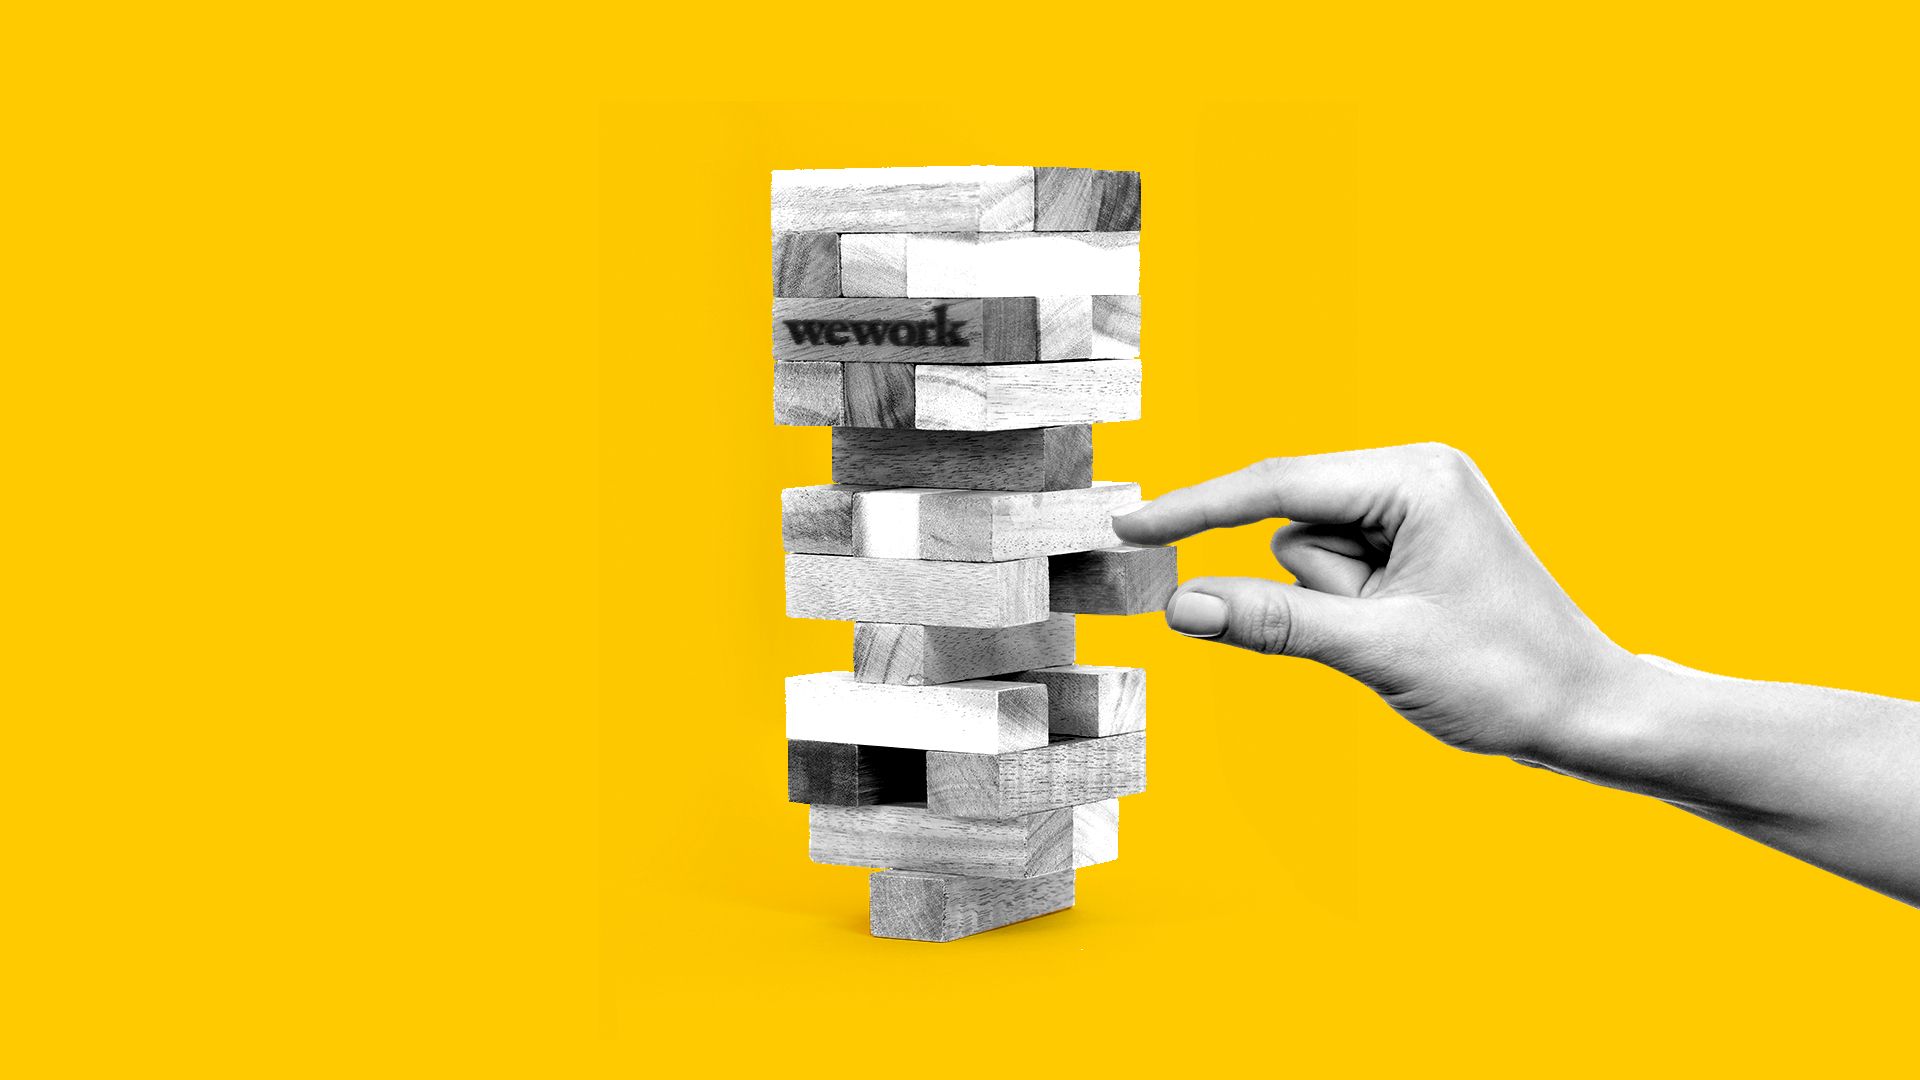 Illustration of a wework building as a Jenga tower with a hand removing a piece.